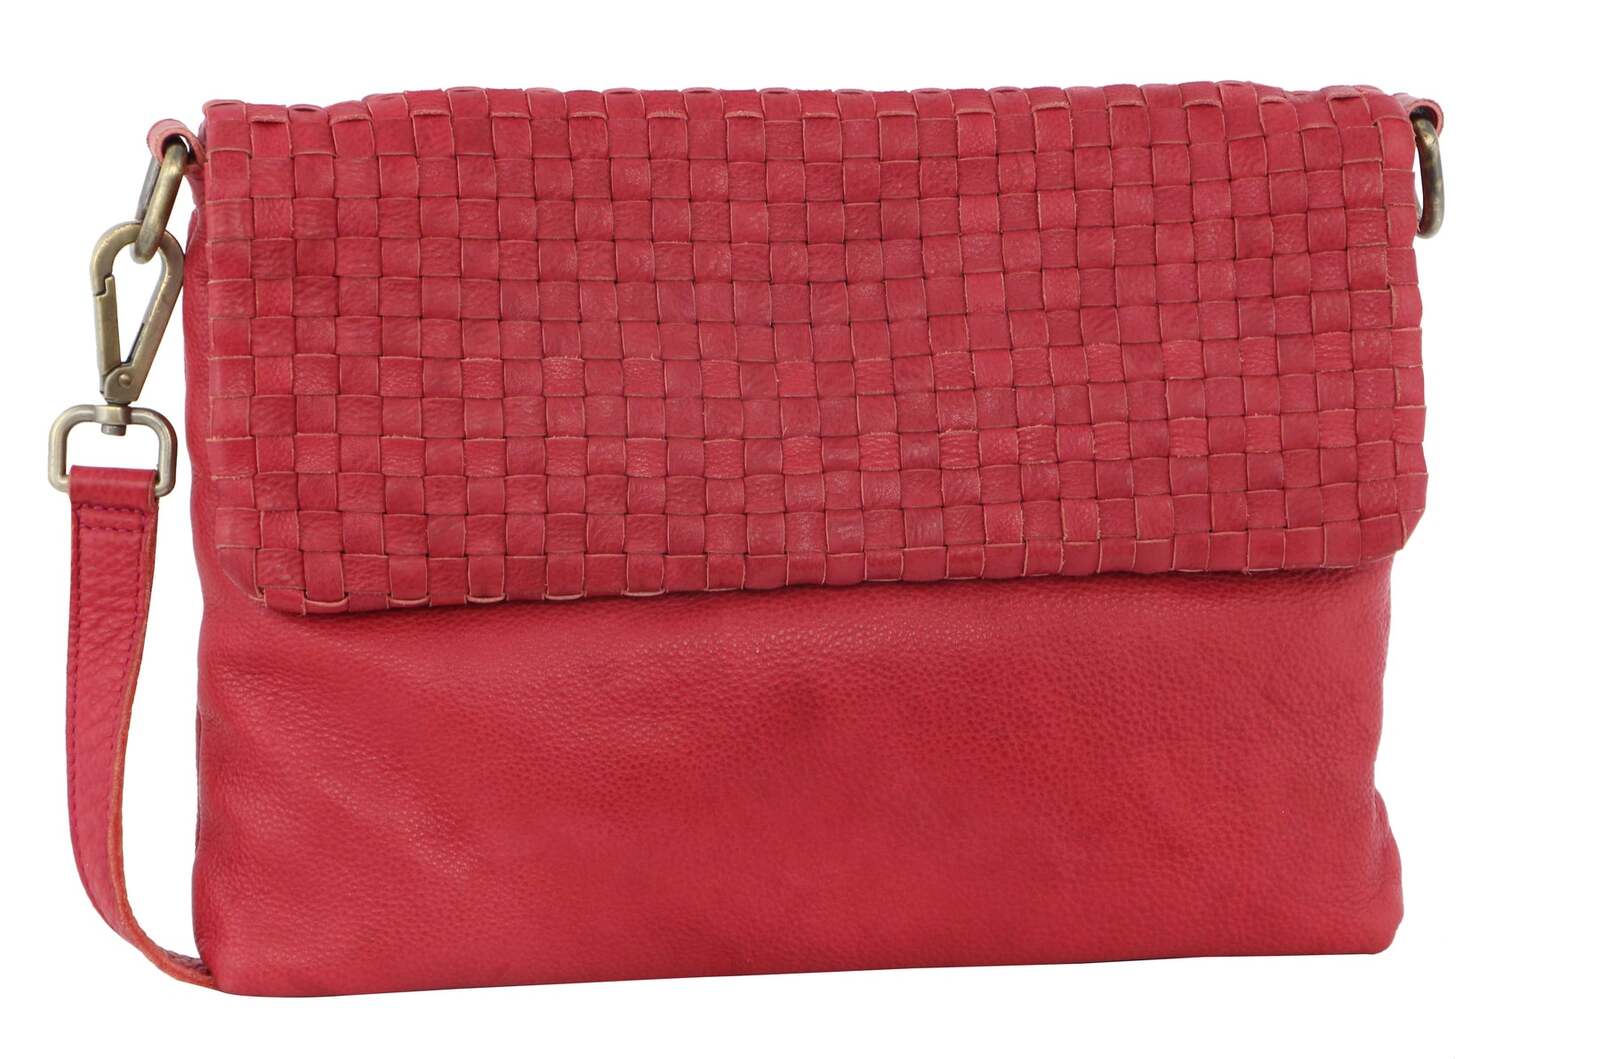 Womens Woven Leather Flap Cross-Body Bag/Clutch - Red